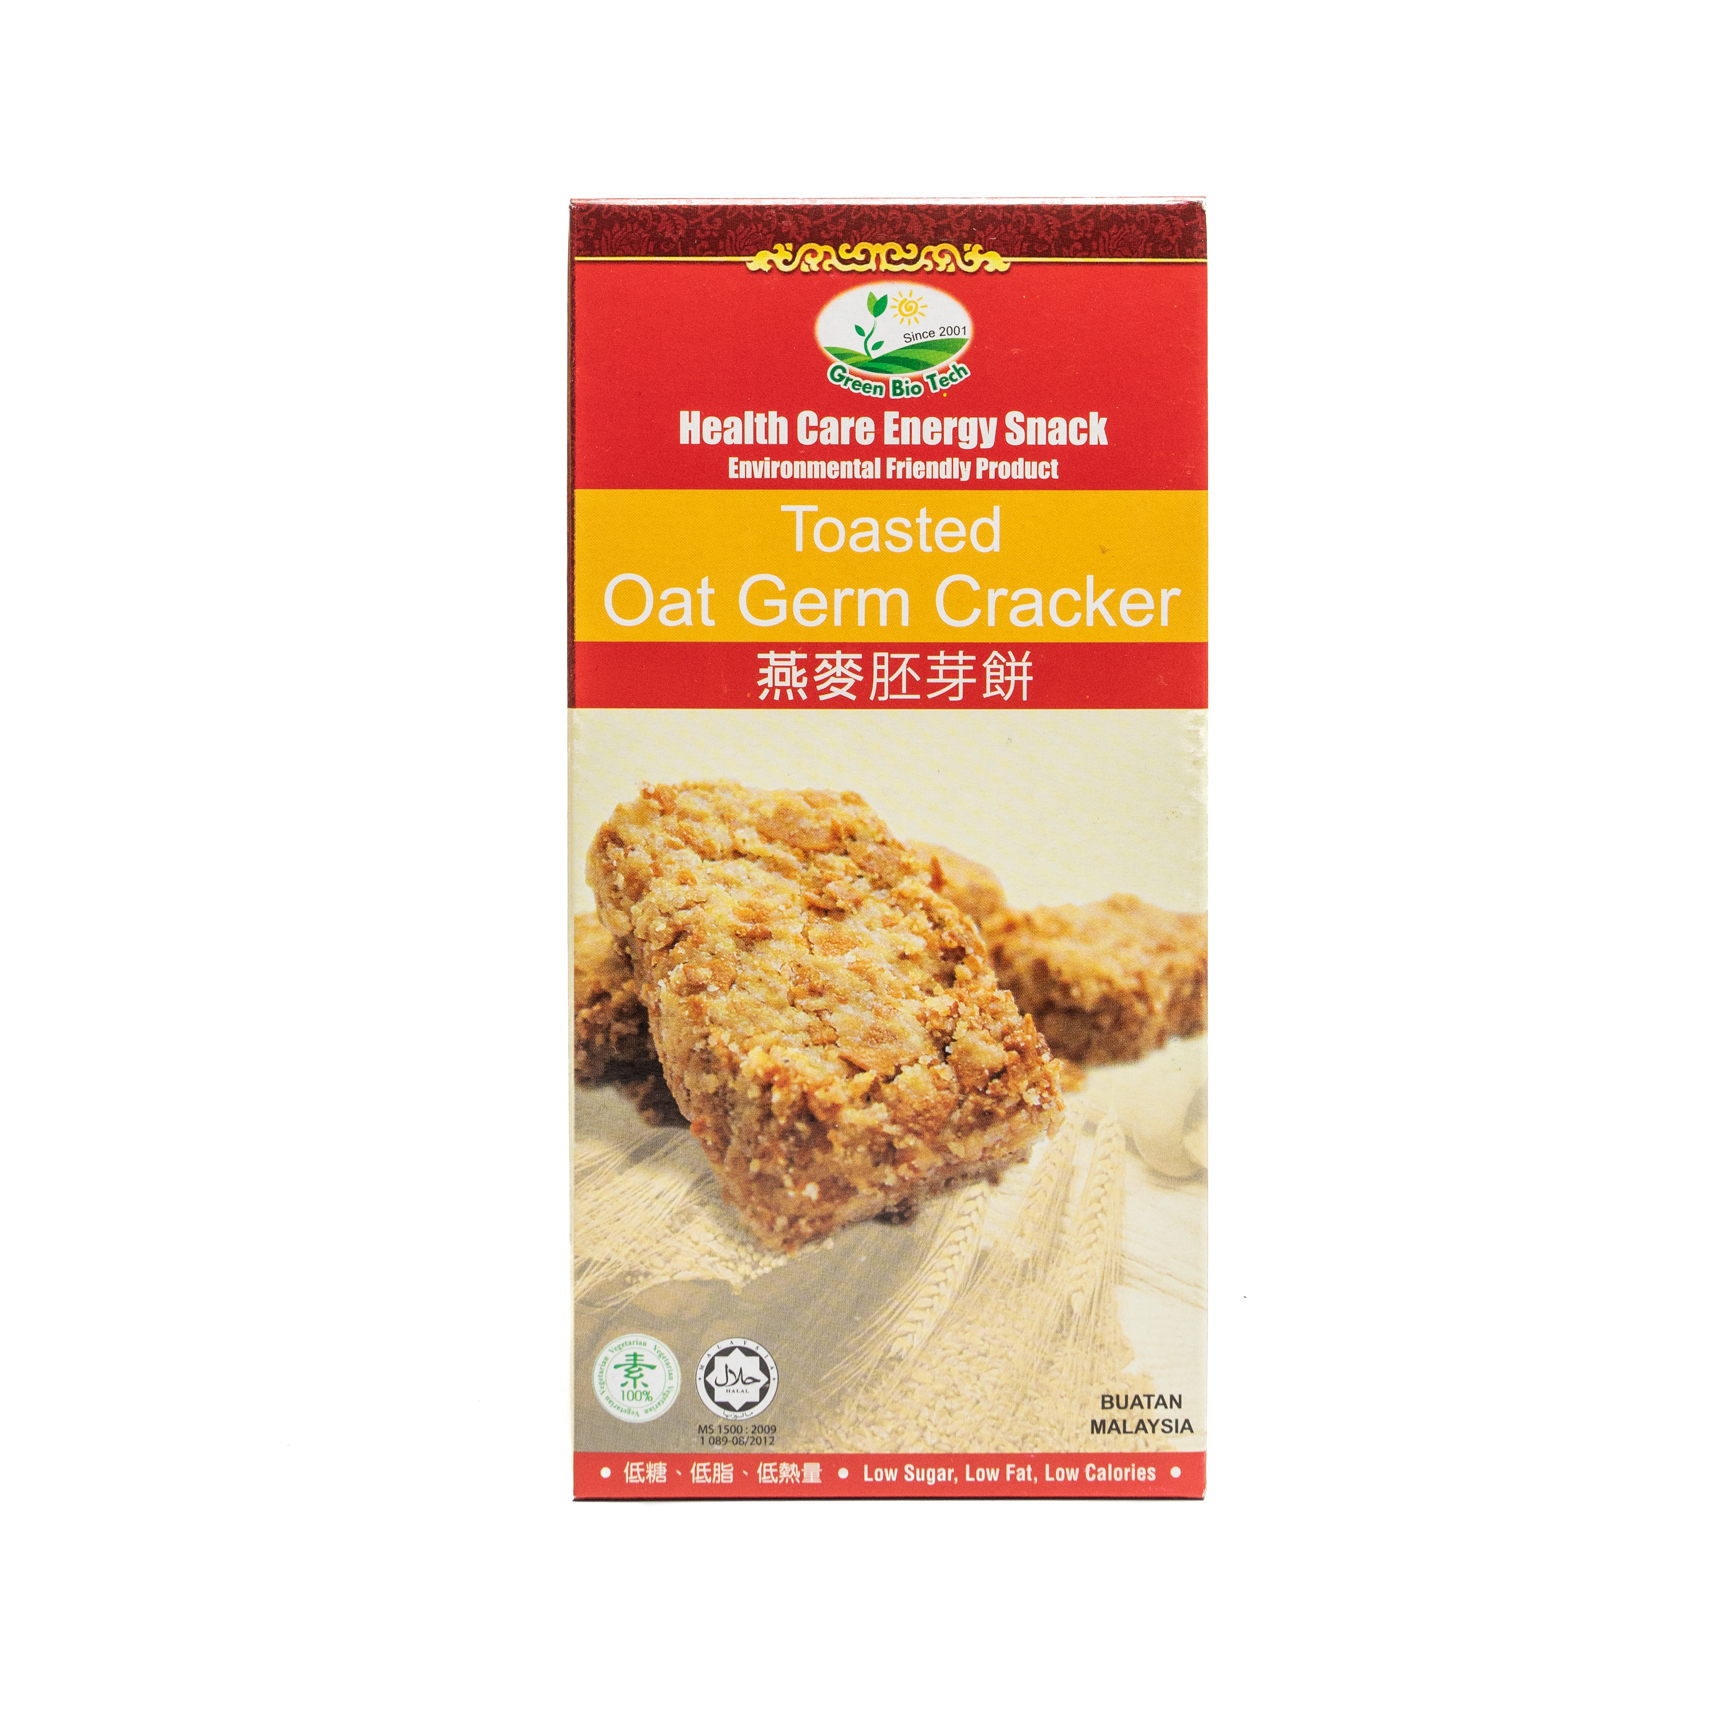 Toasted Oat Germ Cracker